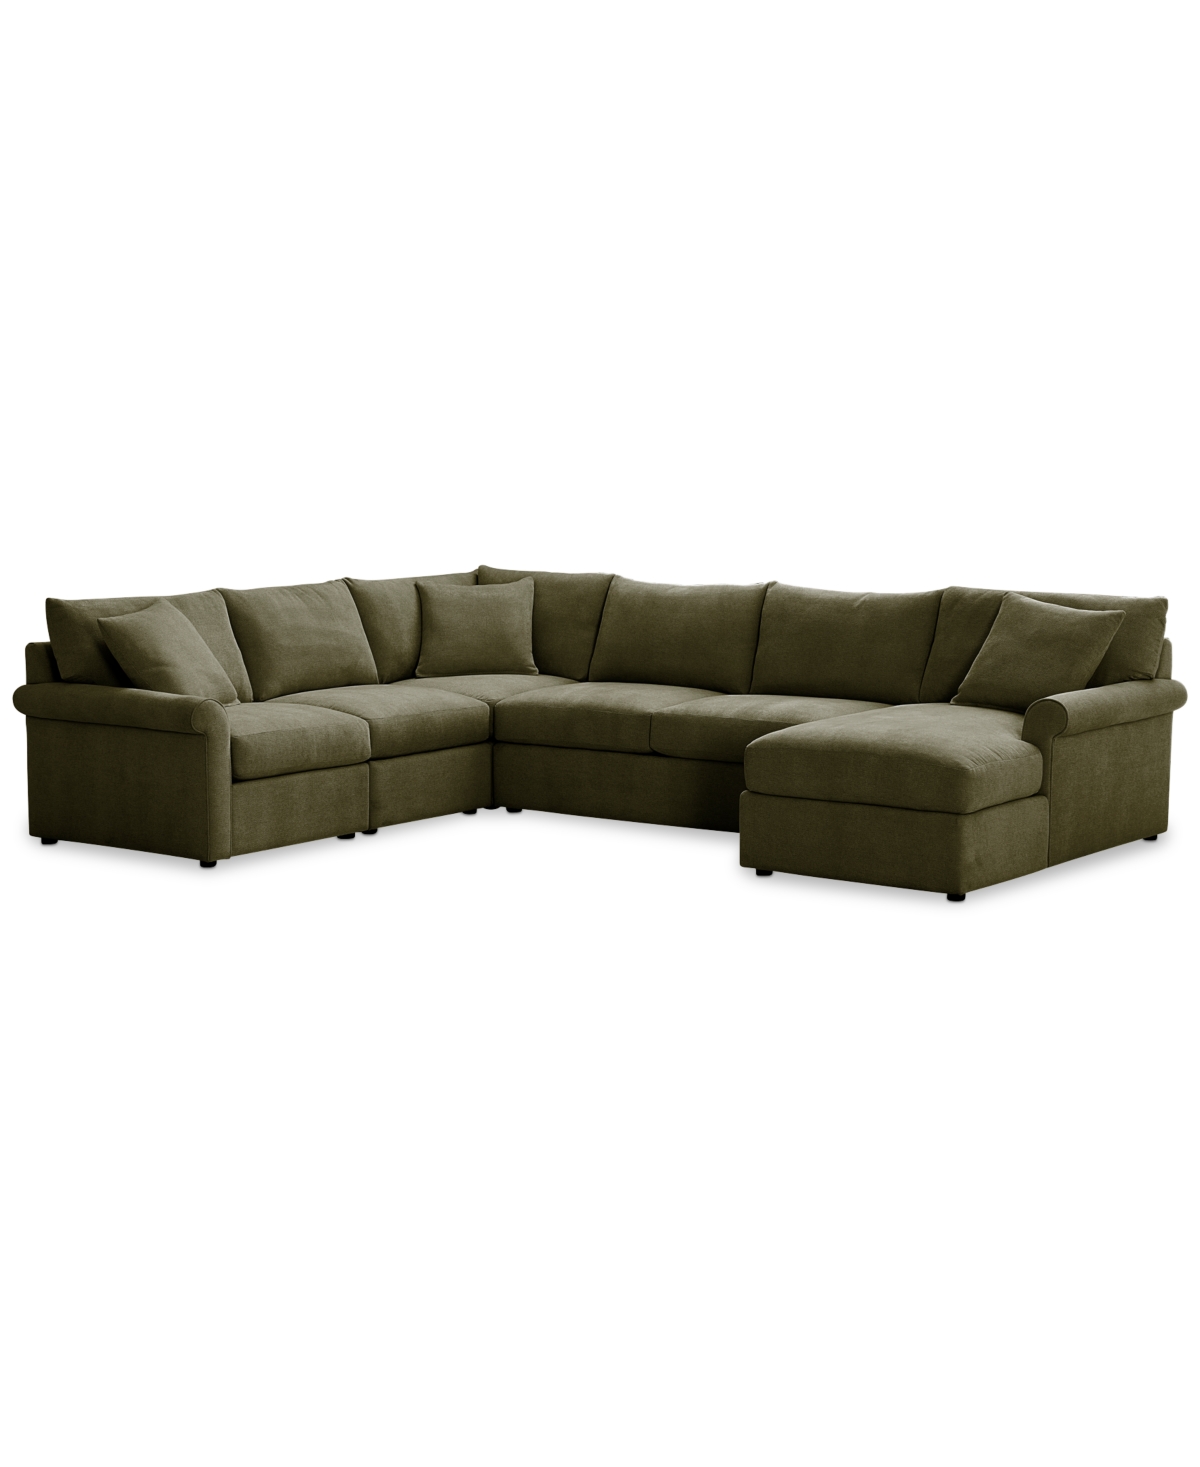 Furniture Wrenley 138" 5-pc. Fabric Modular Sleeper Chaise Sectional Sofa, Created For Macy's In Olive